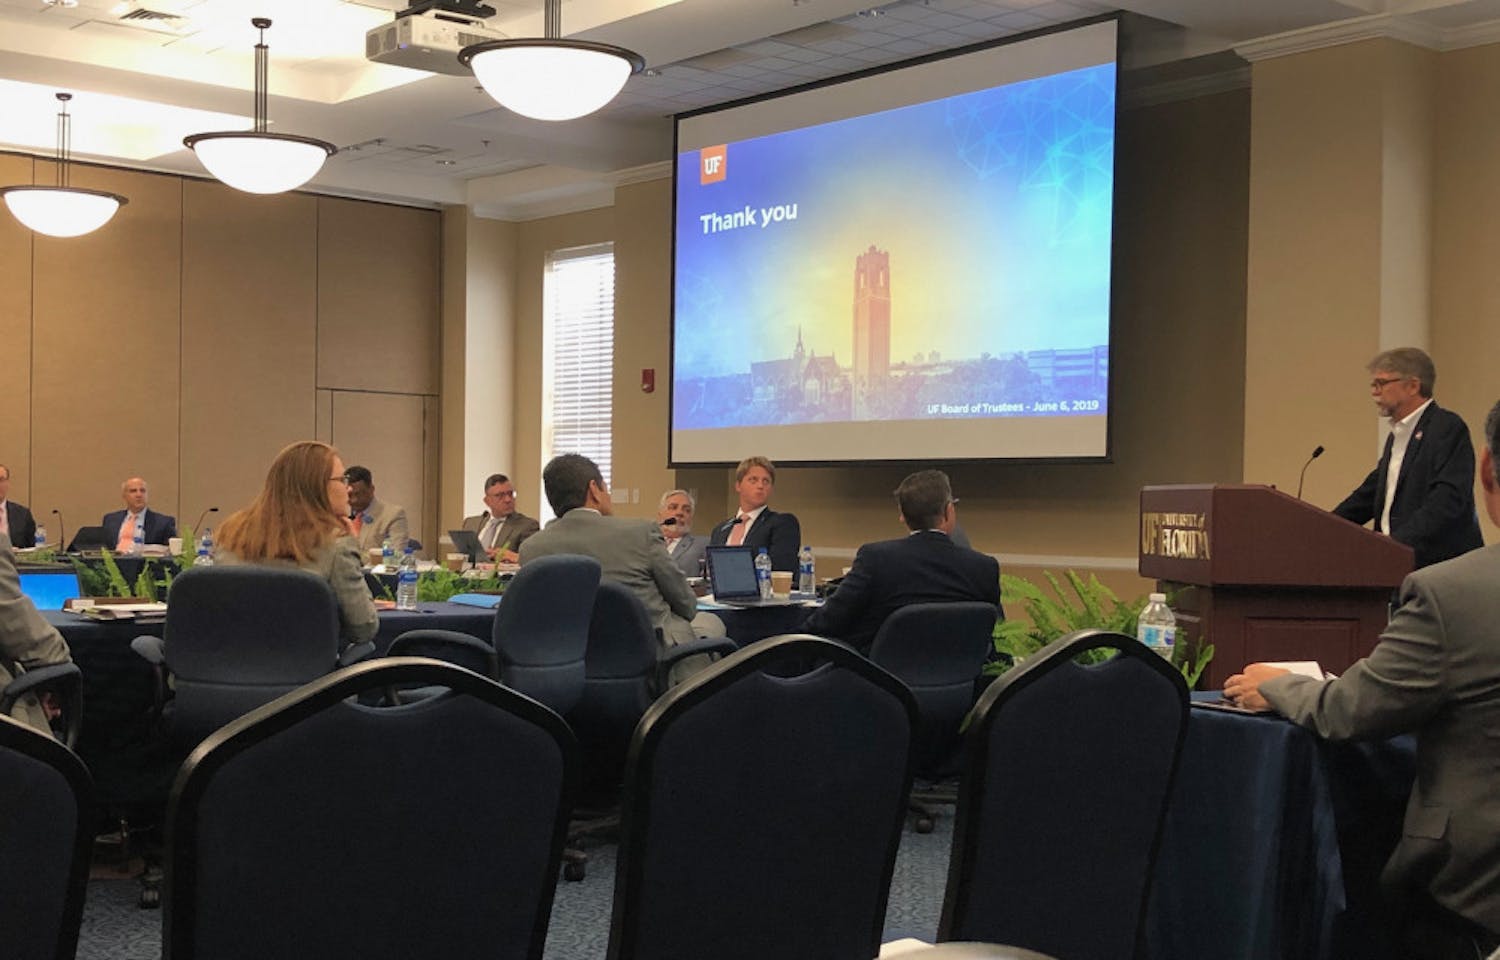 The UF Board of Trustees meeting on June 8, 2019 held in Emerson Alumni Hall. 